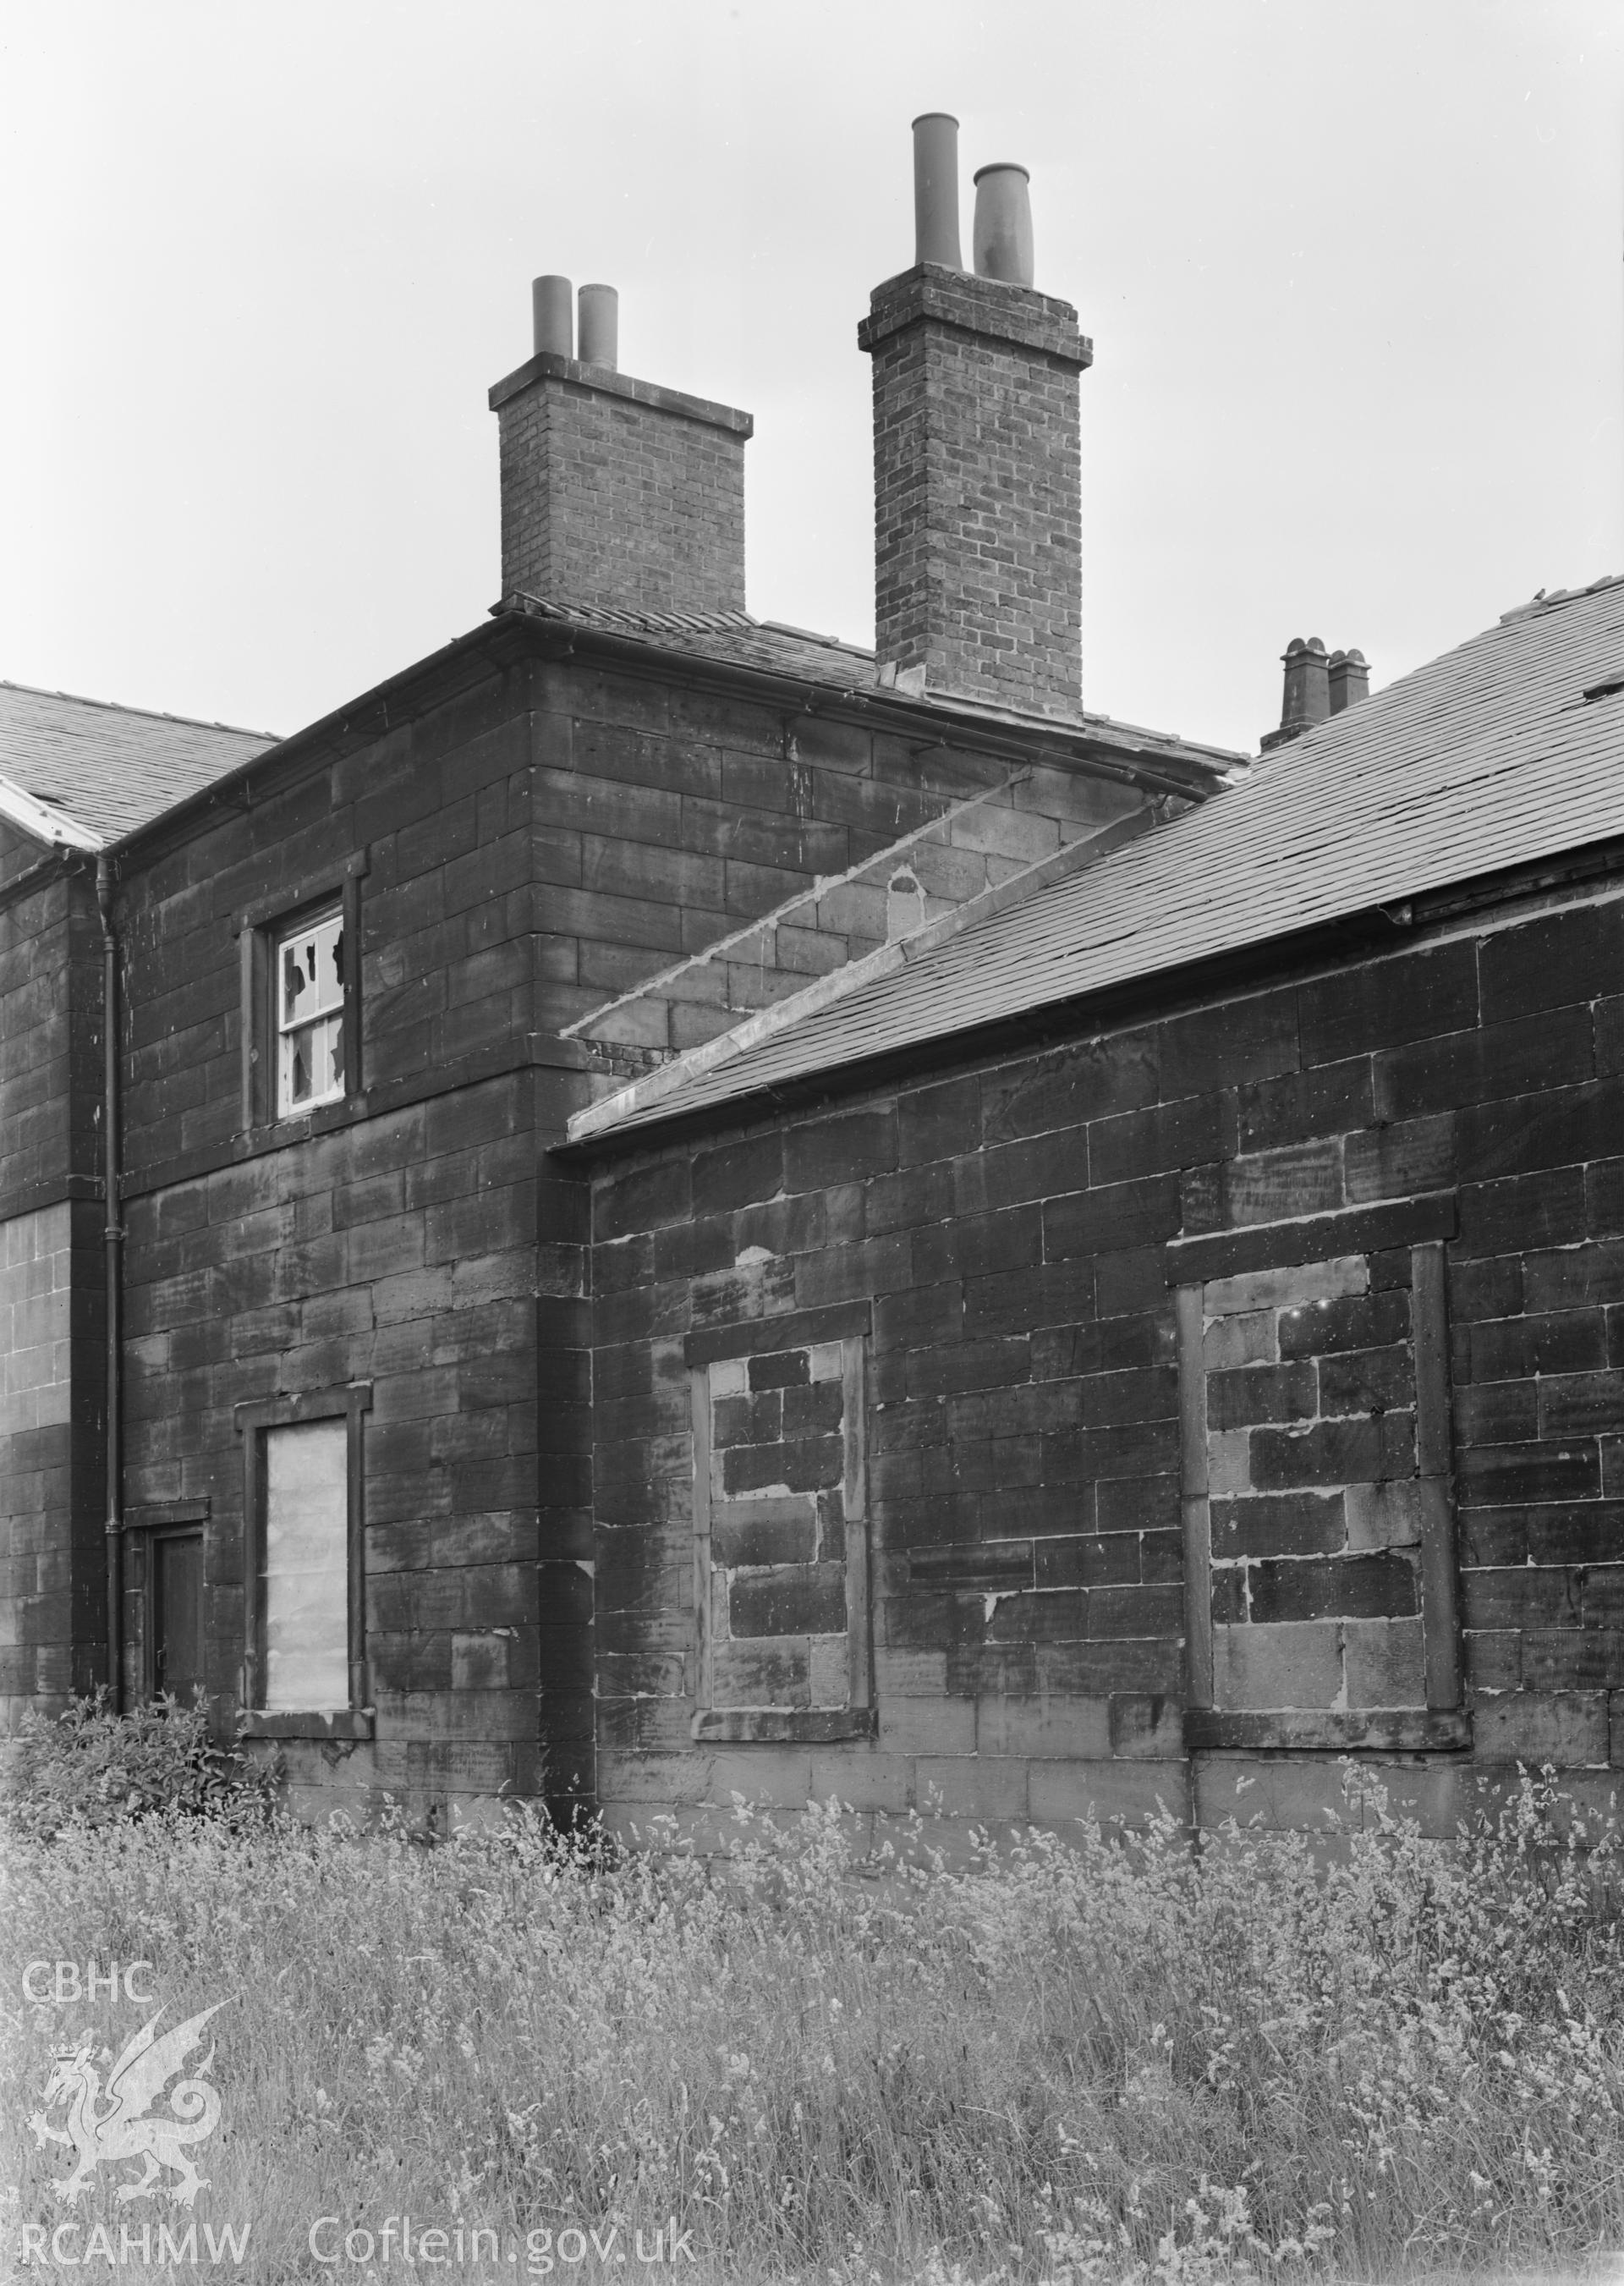 D.O.E photograph of Flint Gaol - blocked windows in sourth east high wing wall. In castle outer ward (since removed).